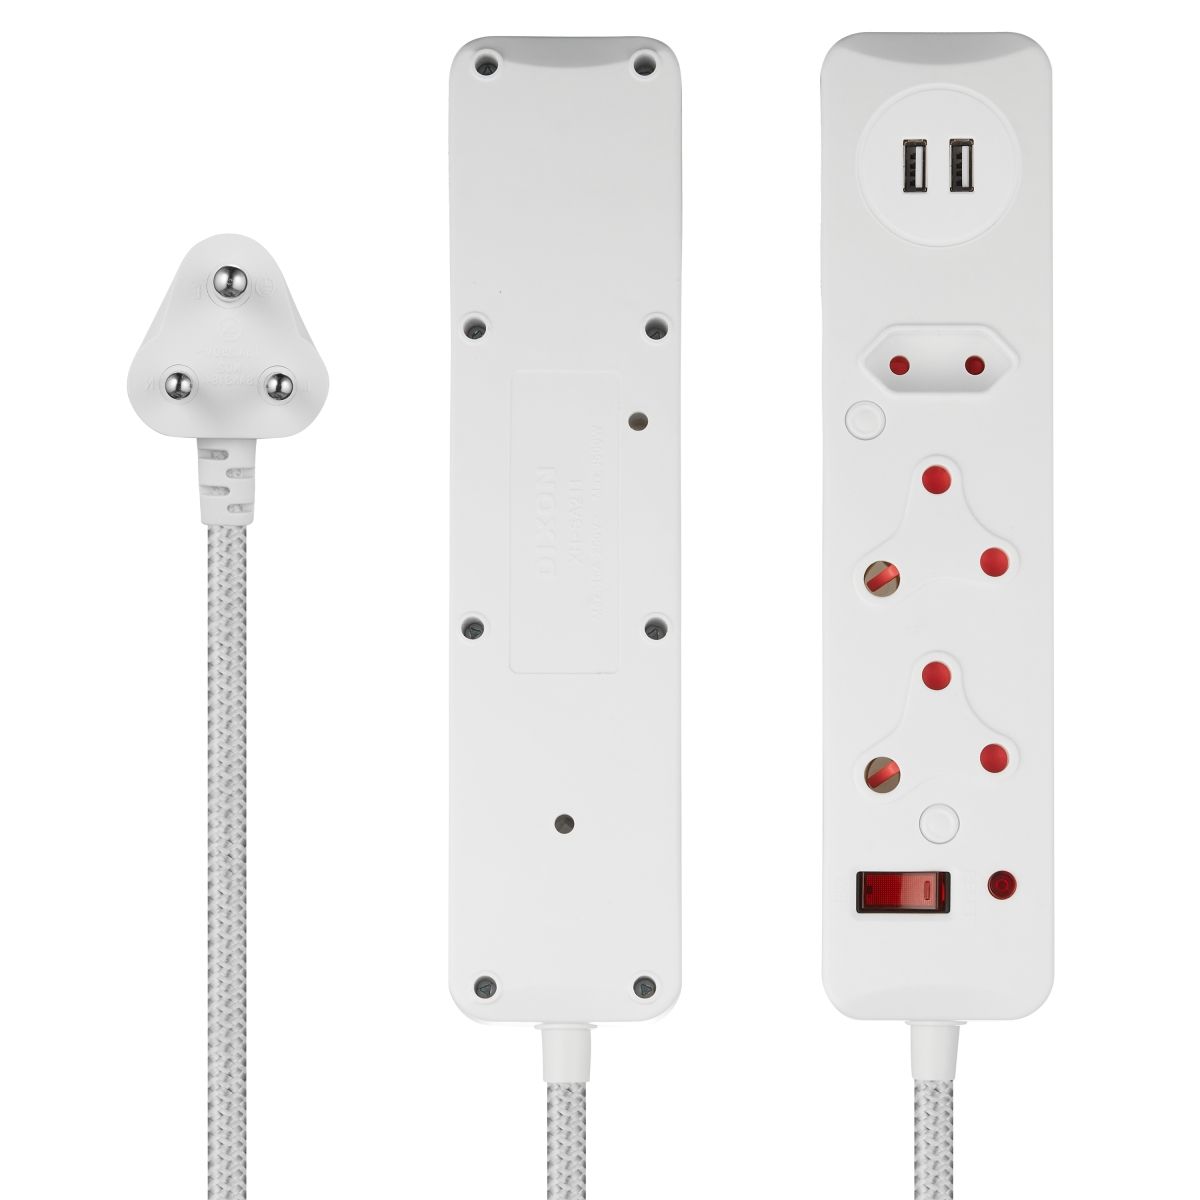 Switched 3-Way Multiplug with USB Ports, Surge Protection & Safety